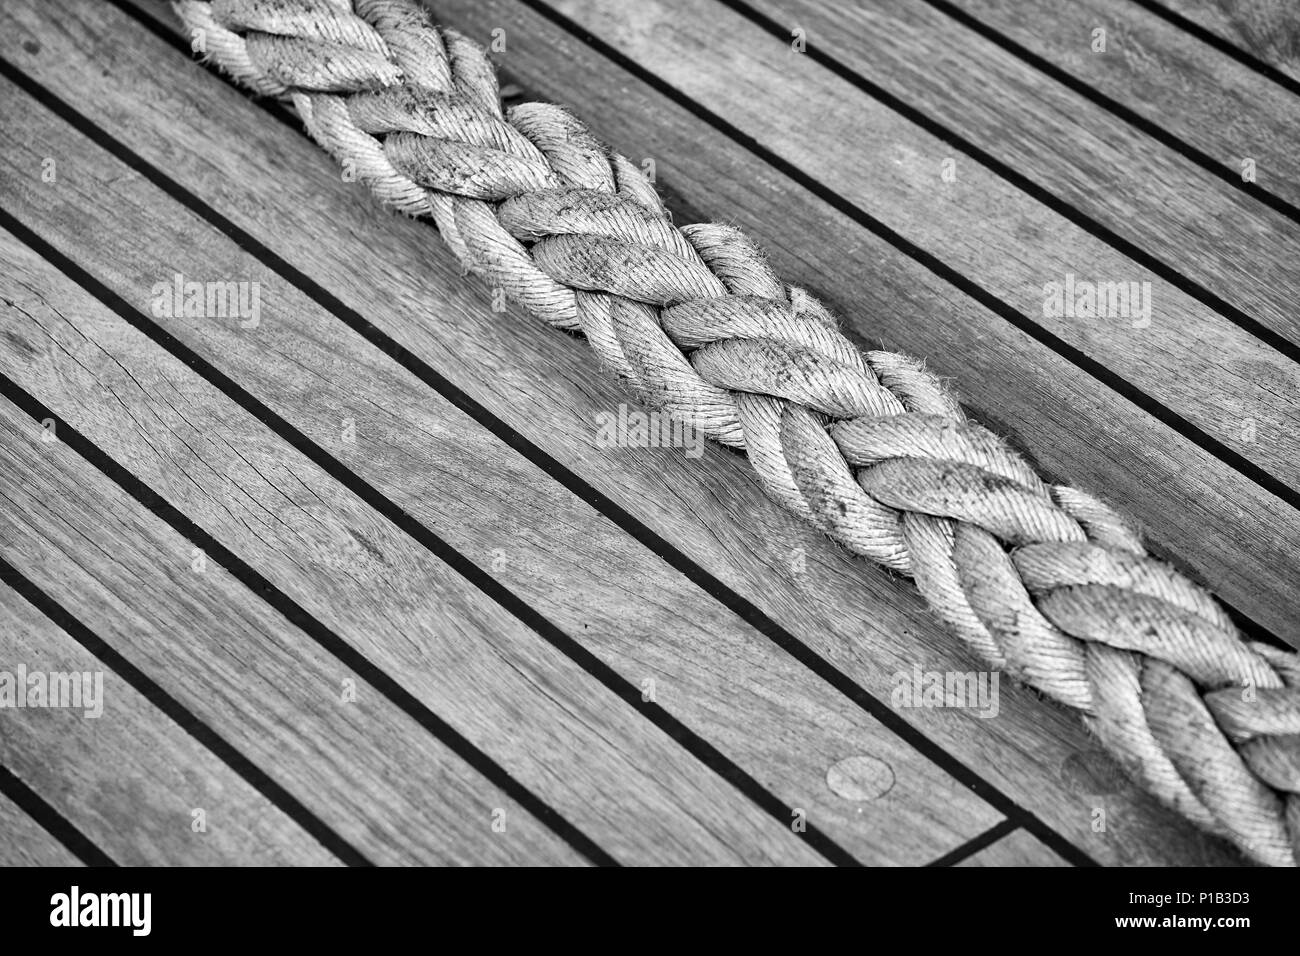 Thick rope on an old sailing ship wooden deck, selective focus. Stock Photo